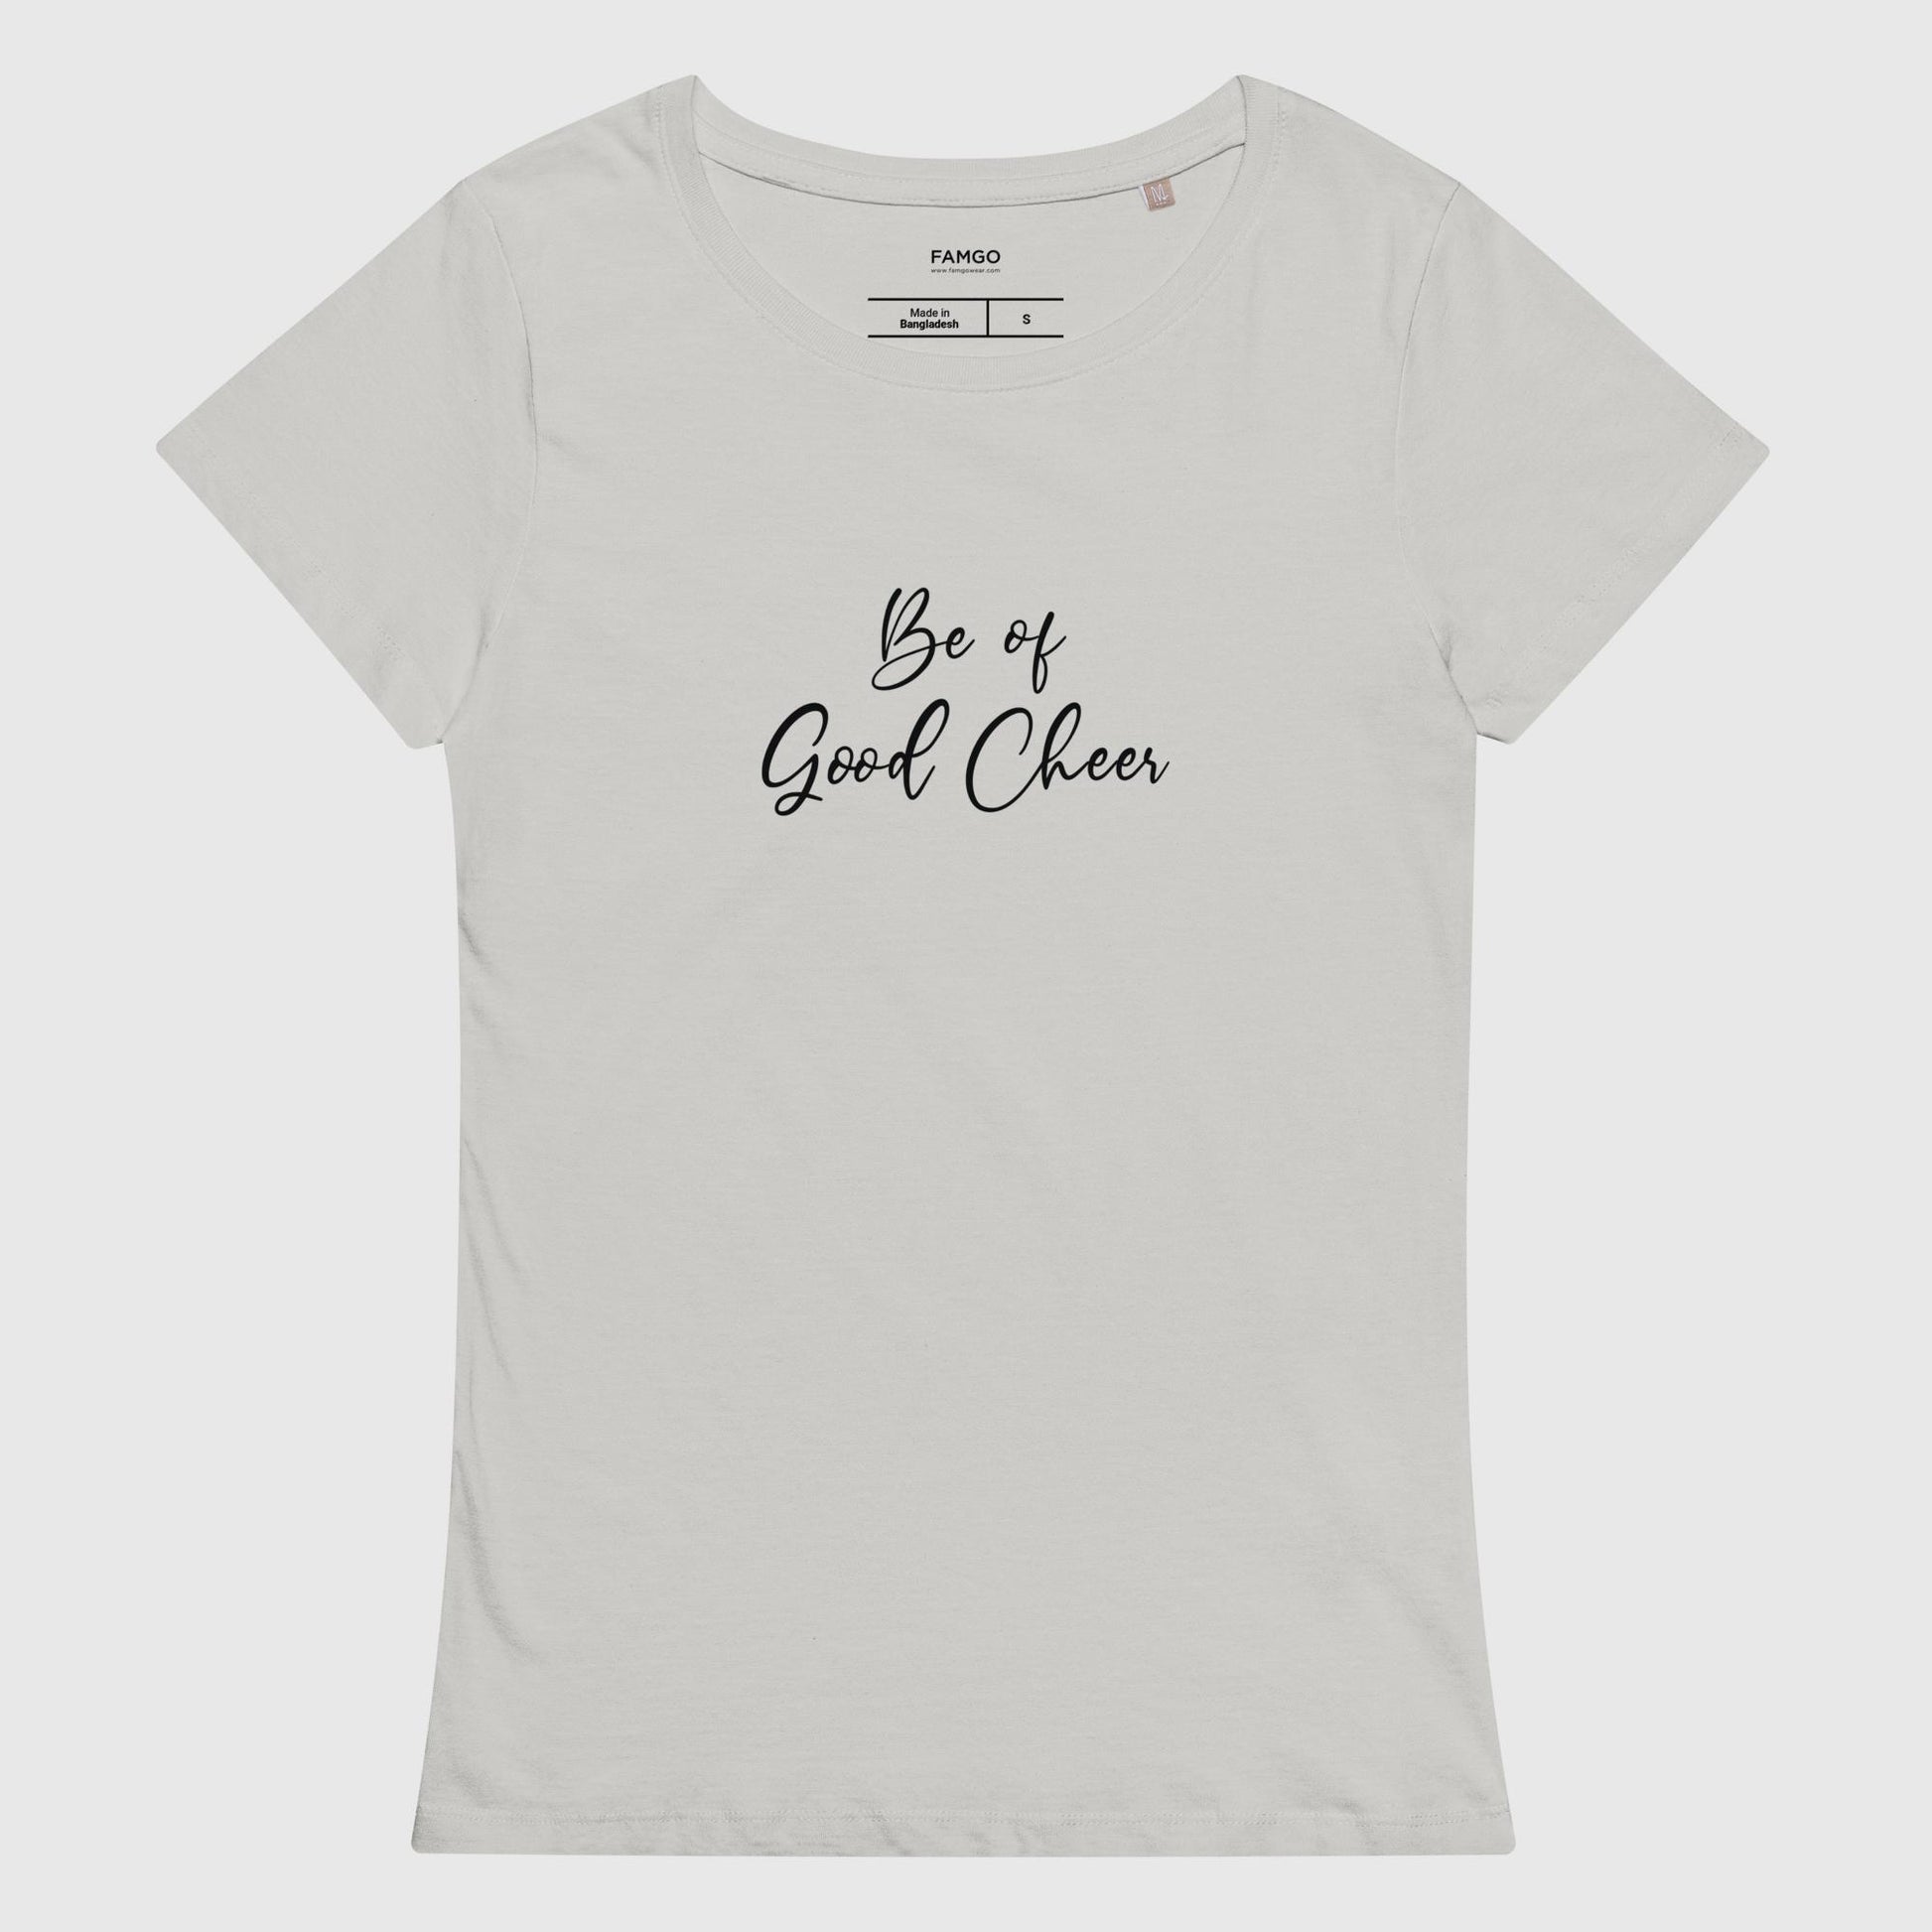 Women's pure gray organic cotton t-shirt that features the positive quote, "Be of Good Cheer."